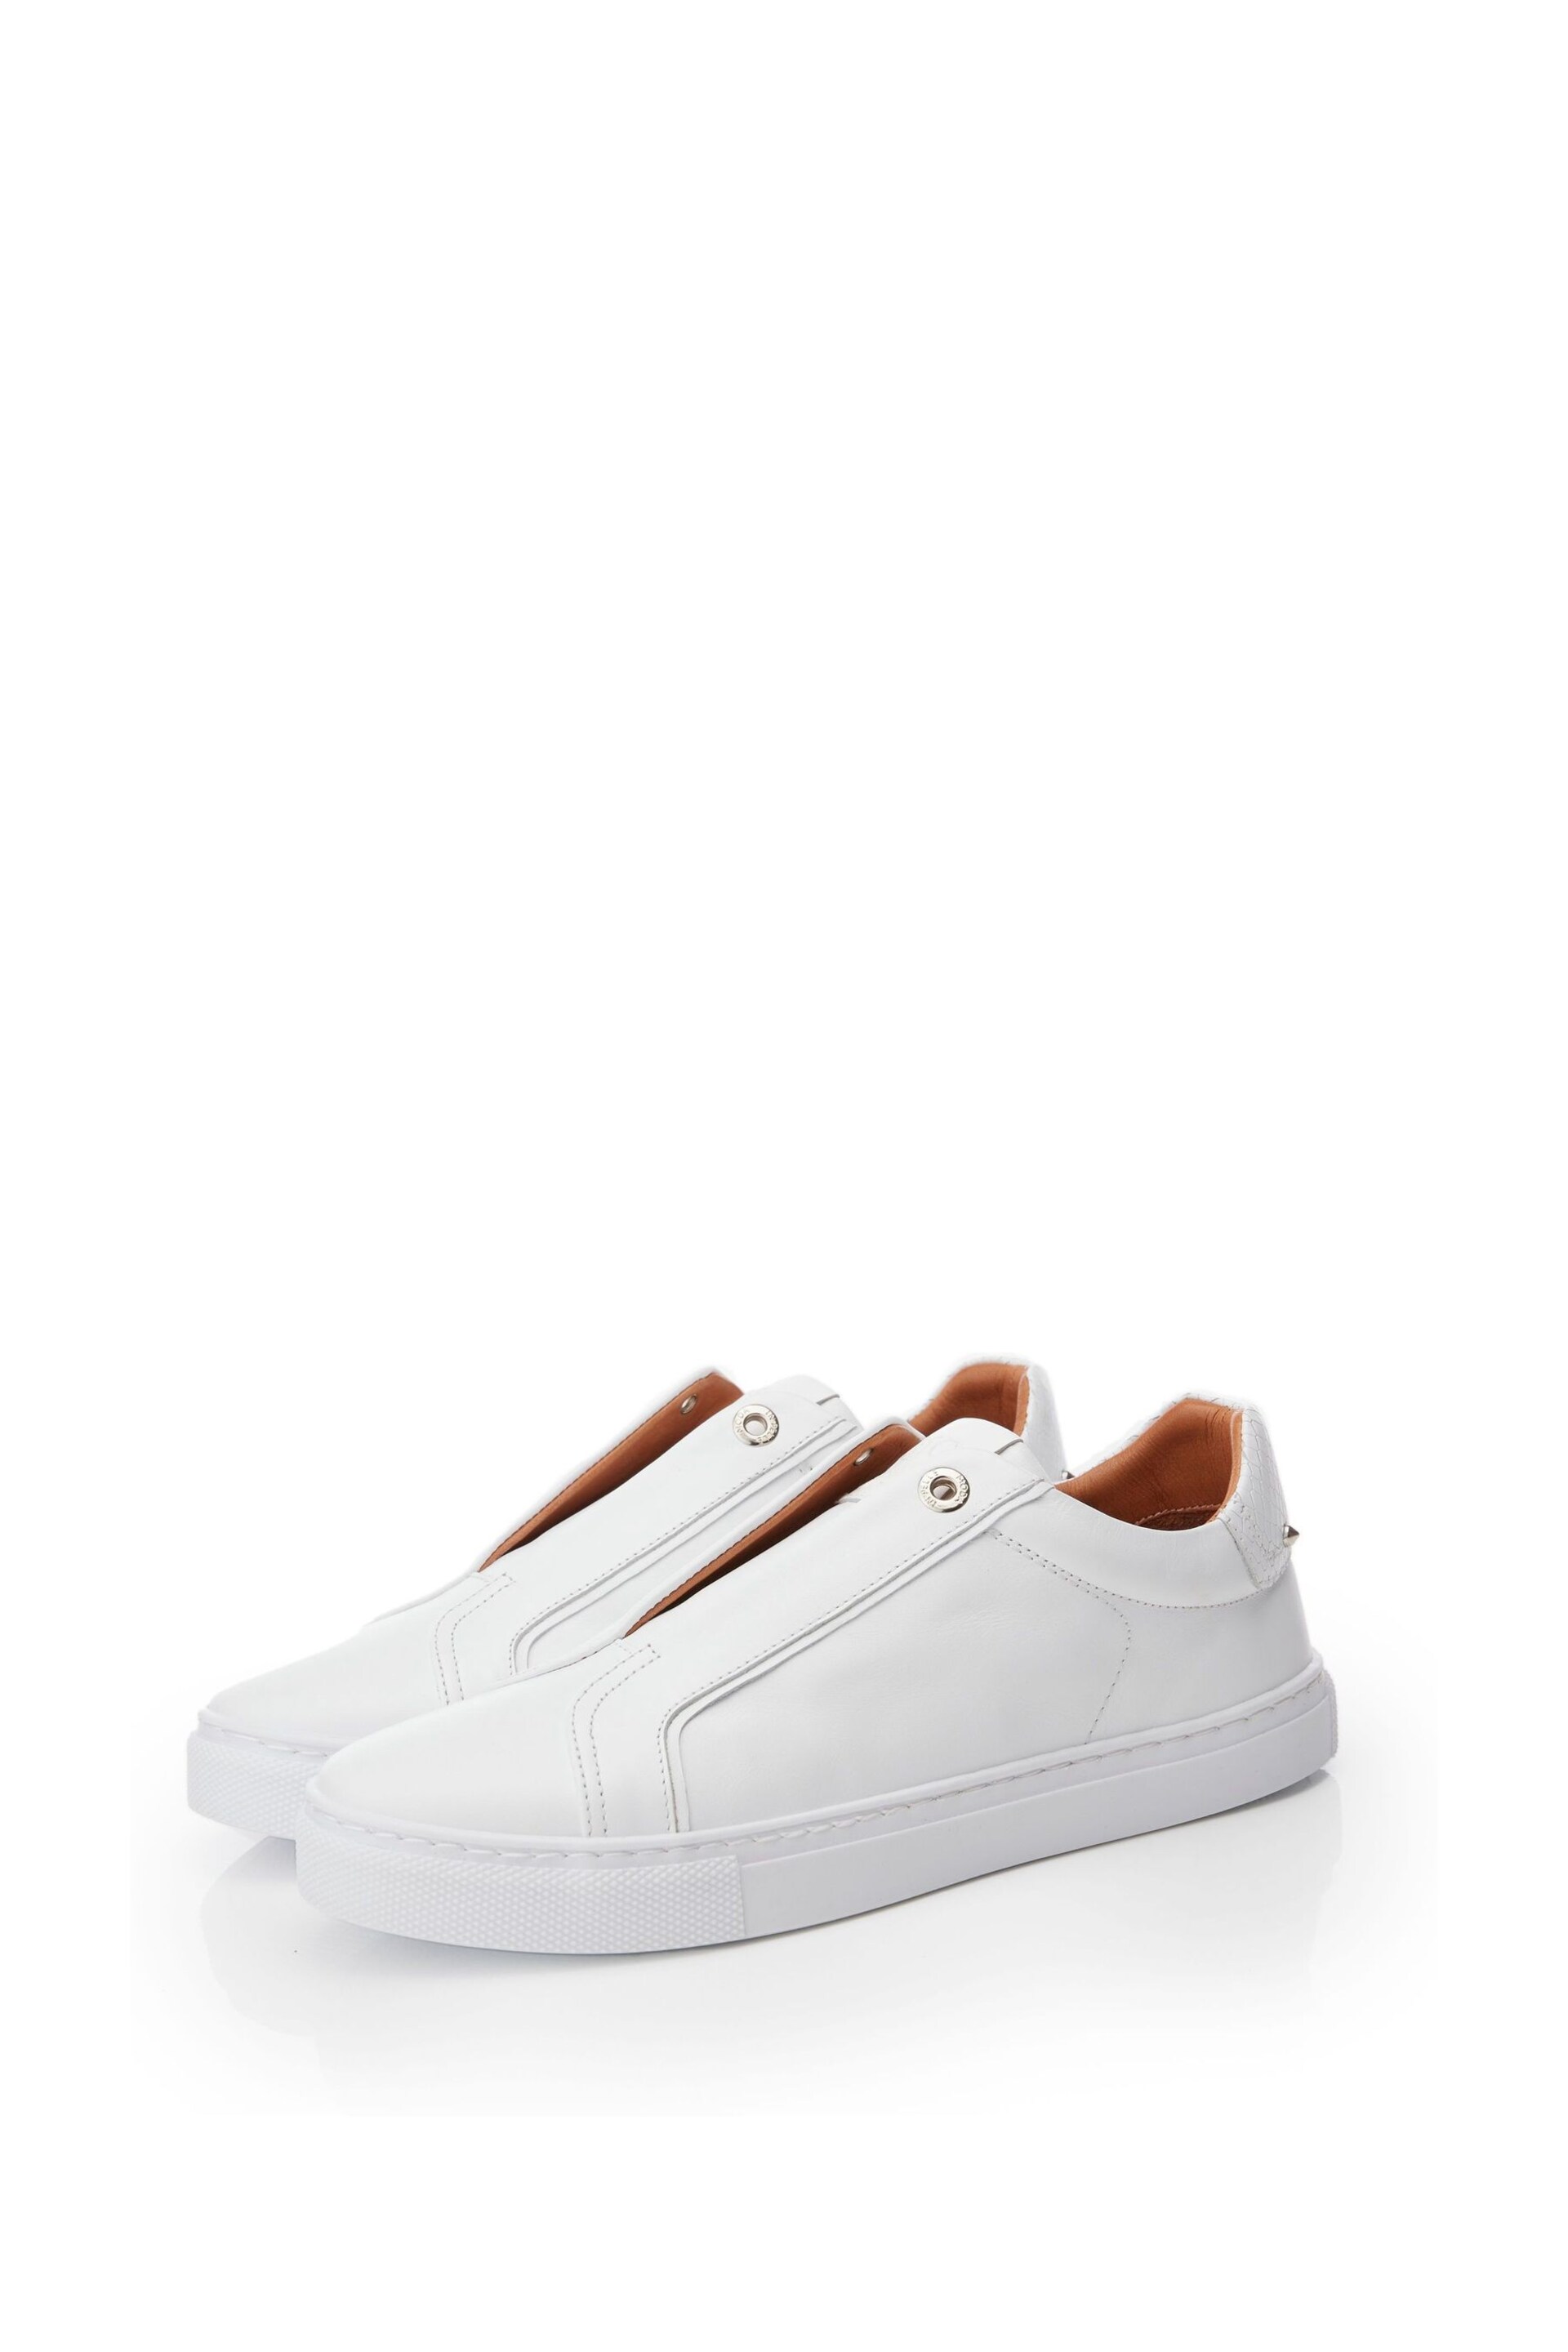 Moda in Pelle Bencina Slip On White Trainers with Elastic - Image 2 of 5